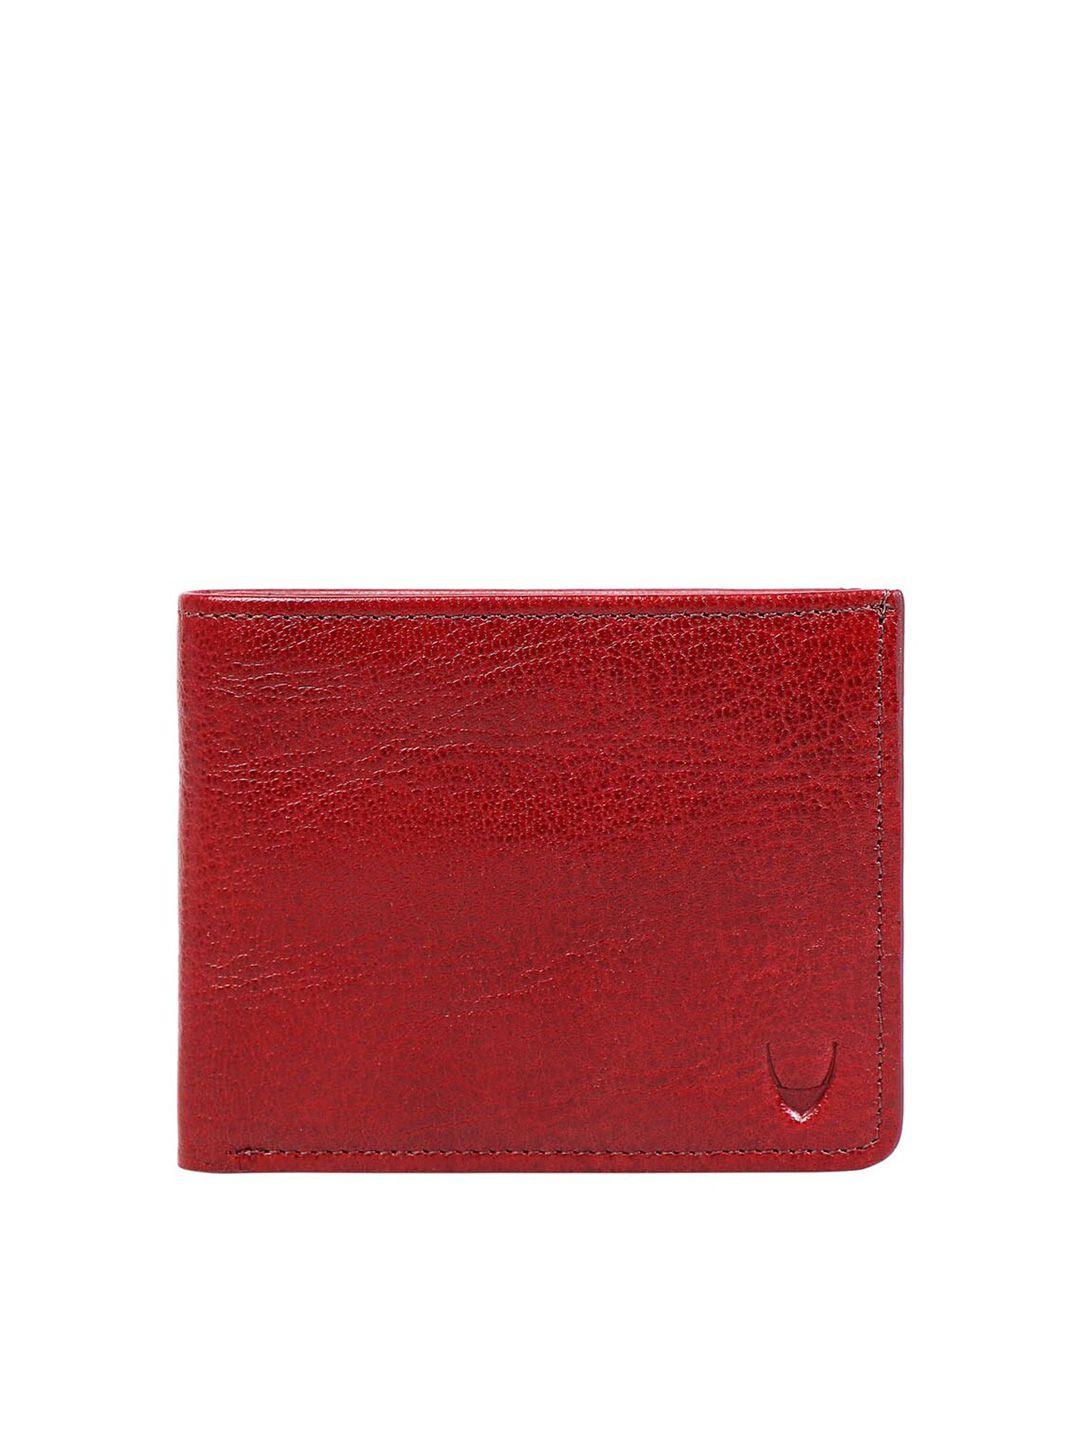 hidesign men red textured two fold wallet